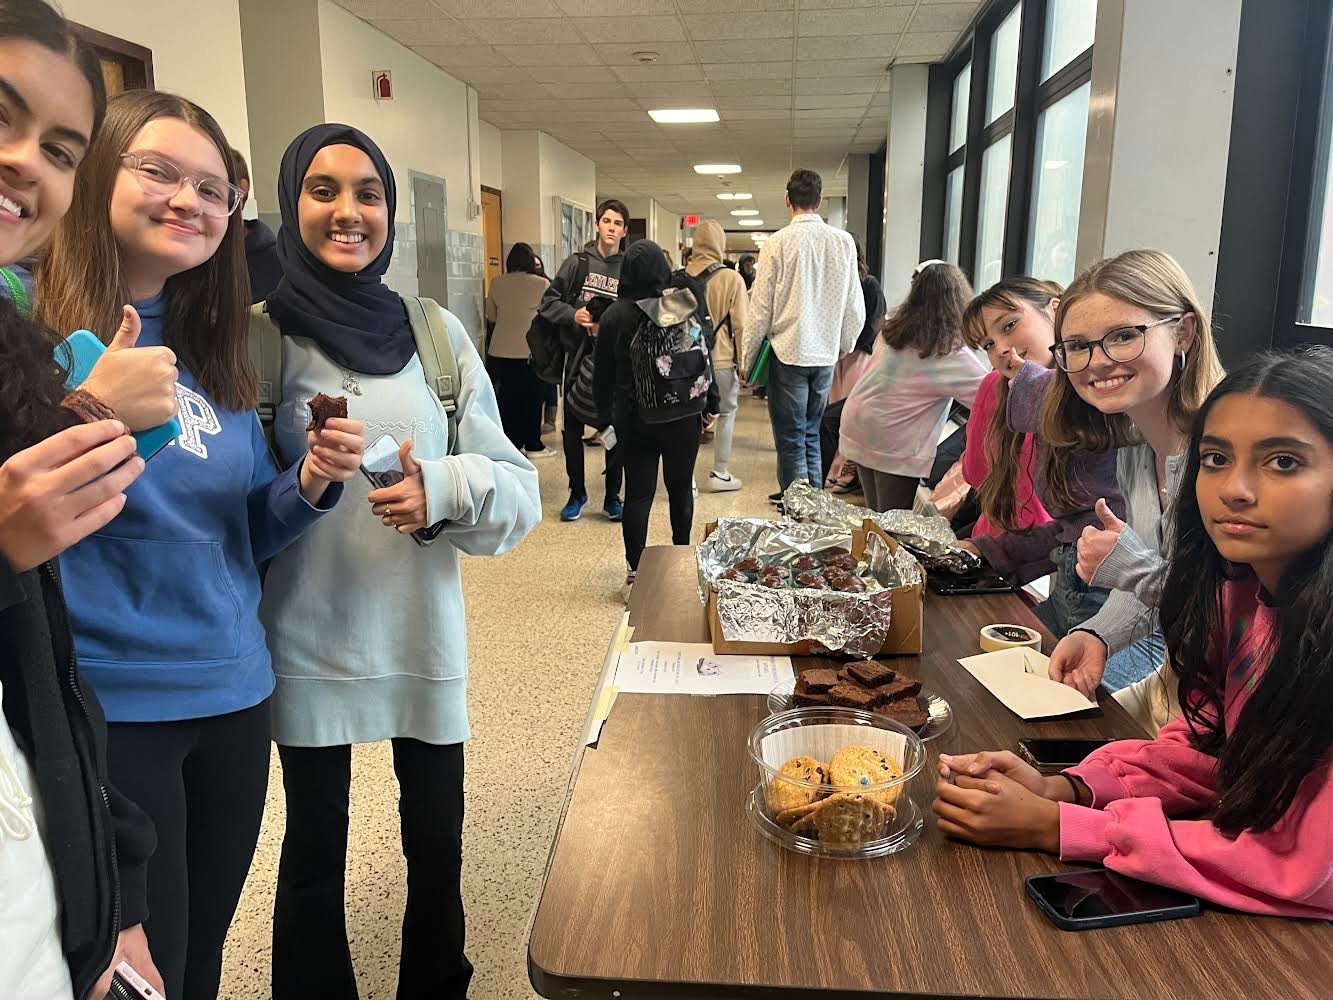 What started in Calhoun quickly spread across the Bellmore-Merrick Central High School District: Students at Mepham High sold baked goods to support the project.